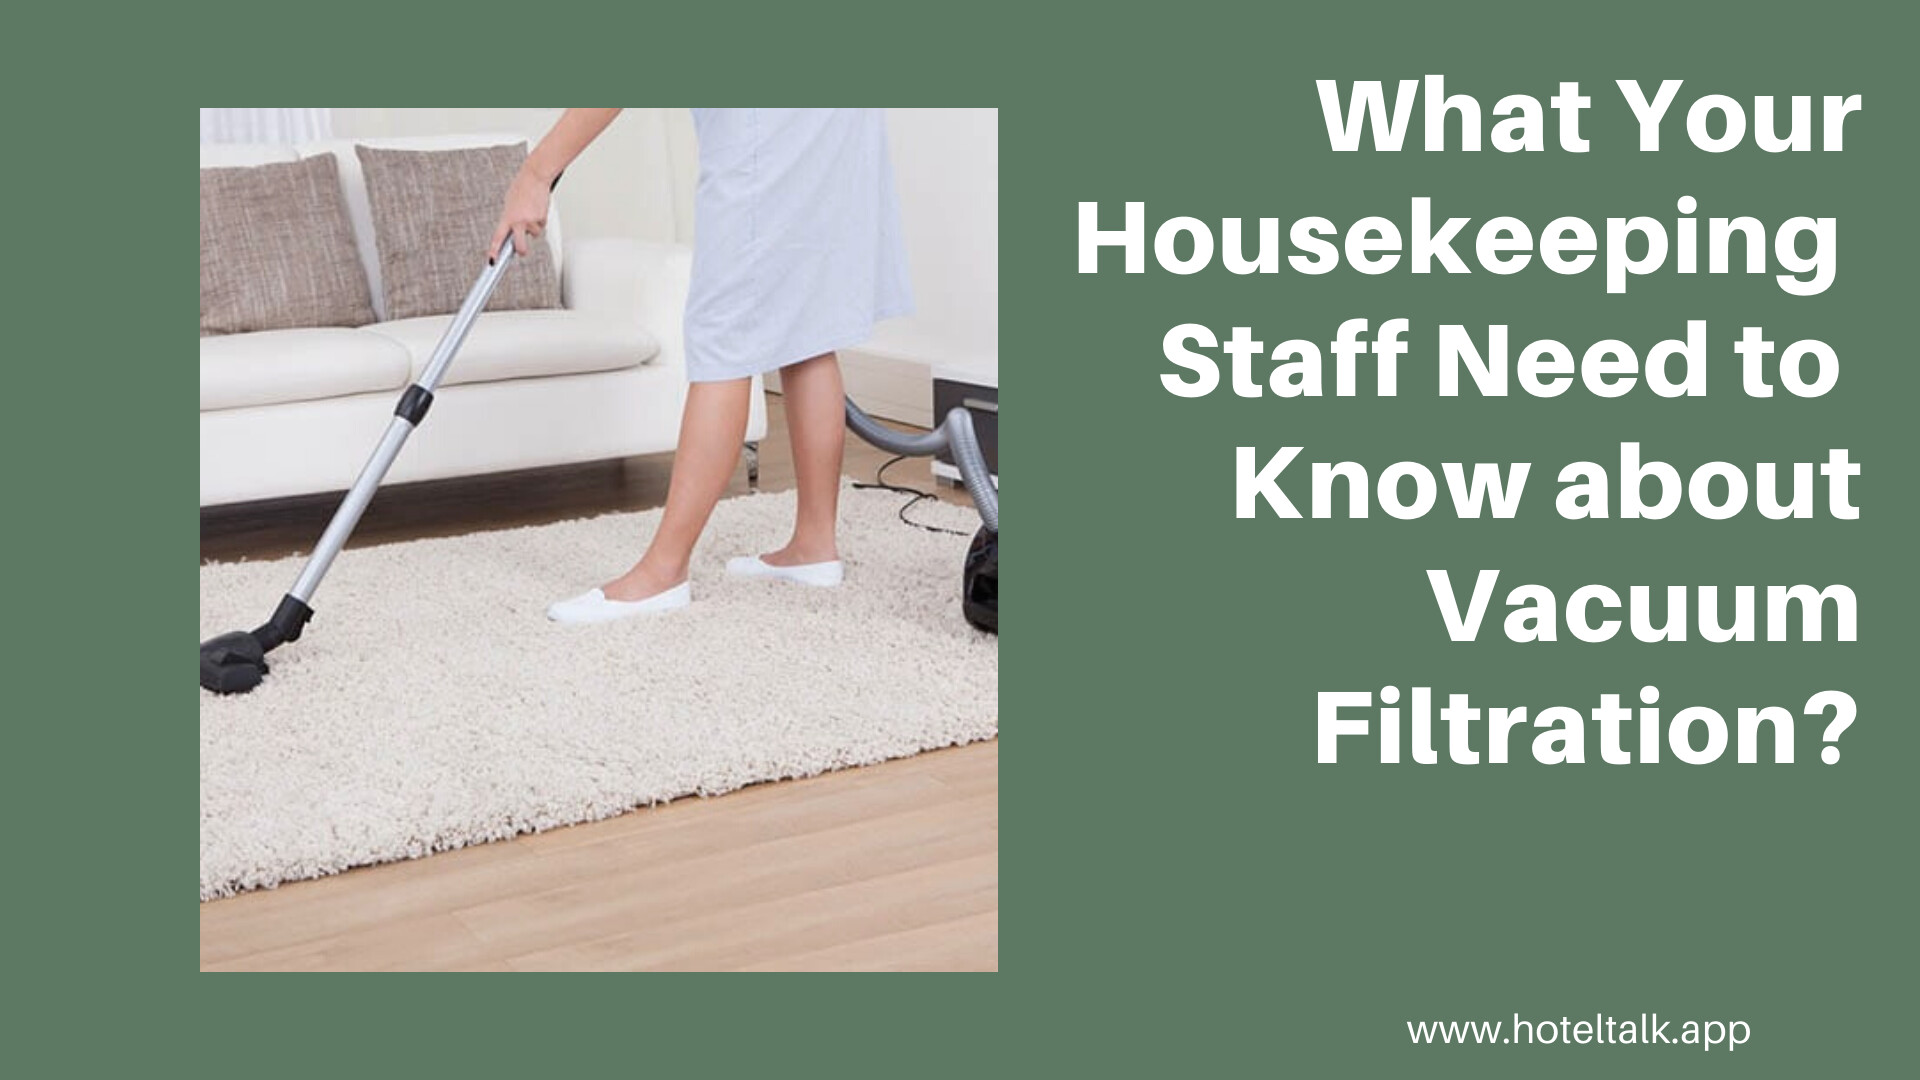 What Your Housekeeping Staff Need to Know about Vacuum Filtration